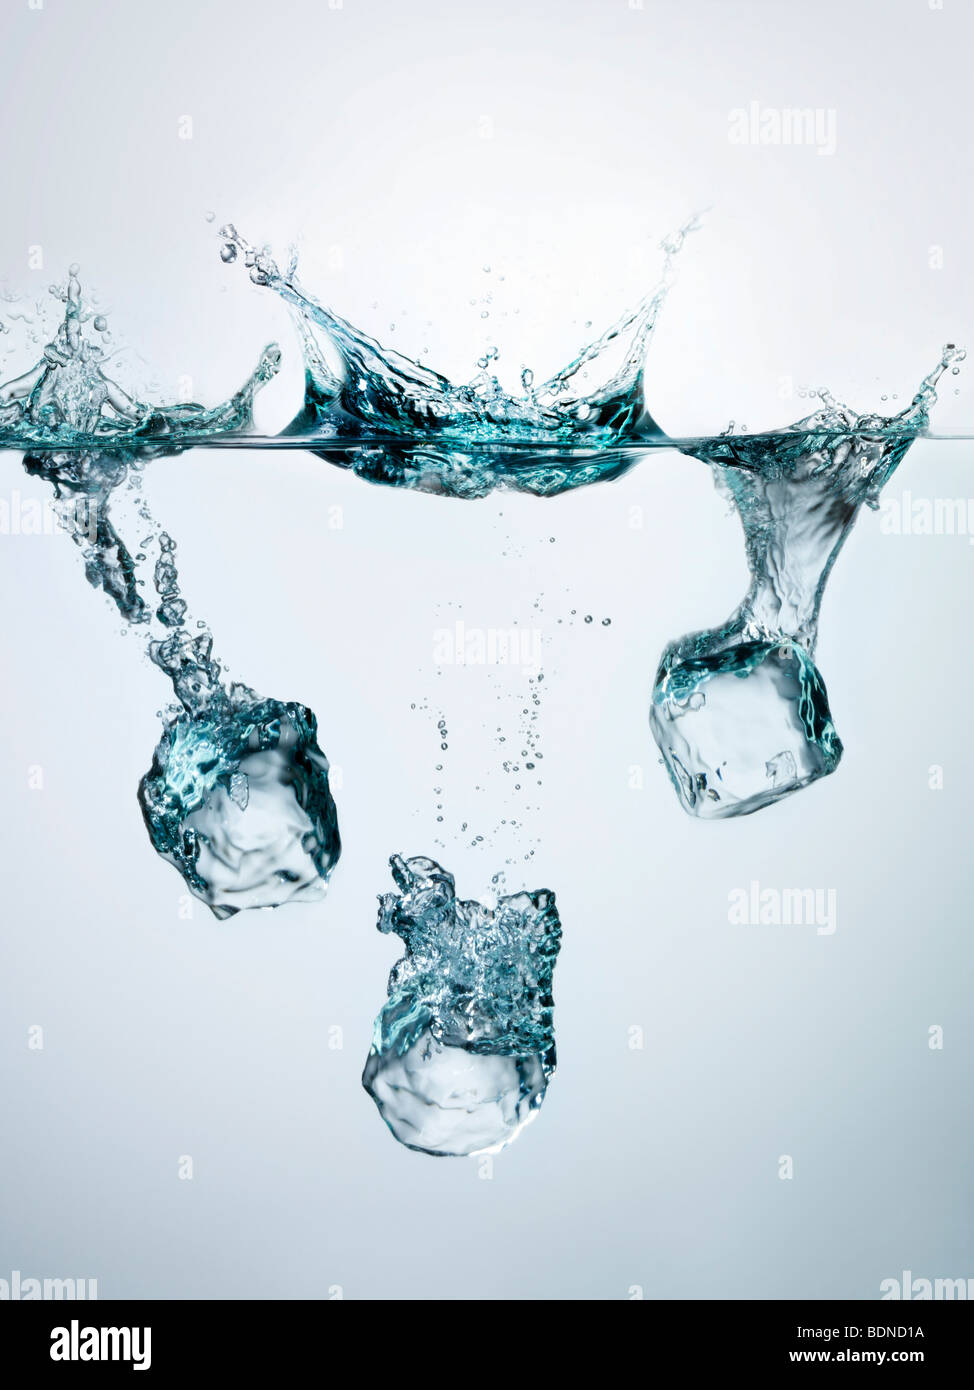 Ice cubes splashing into clear water, surface view Stock Photo